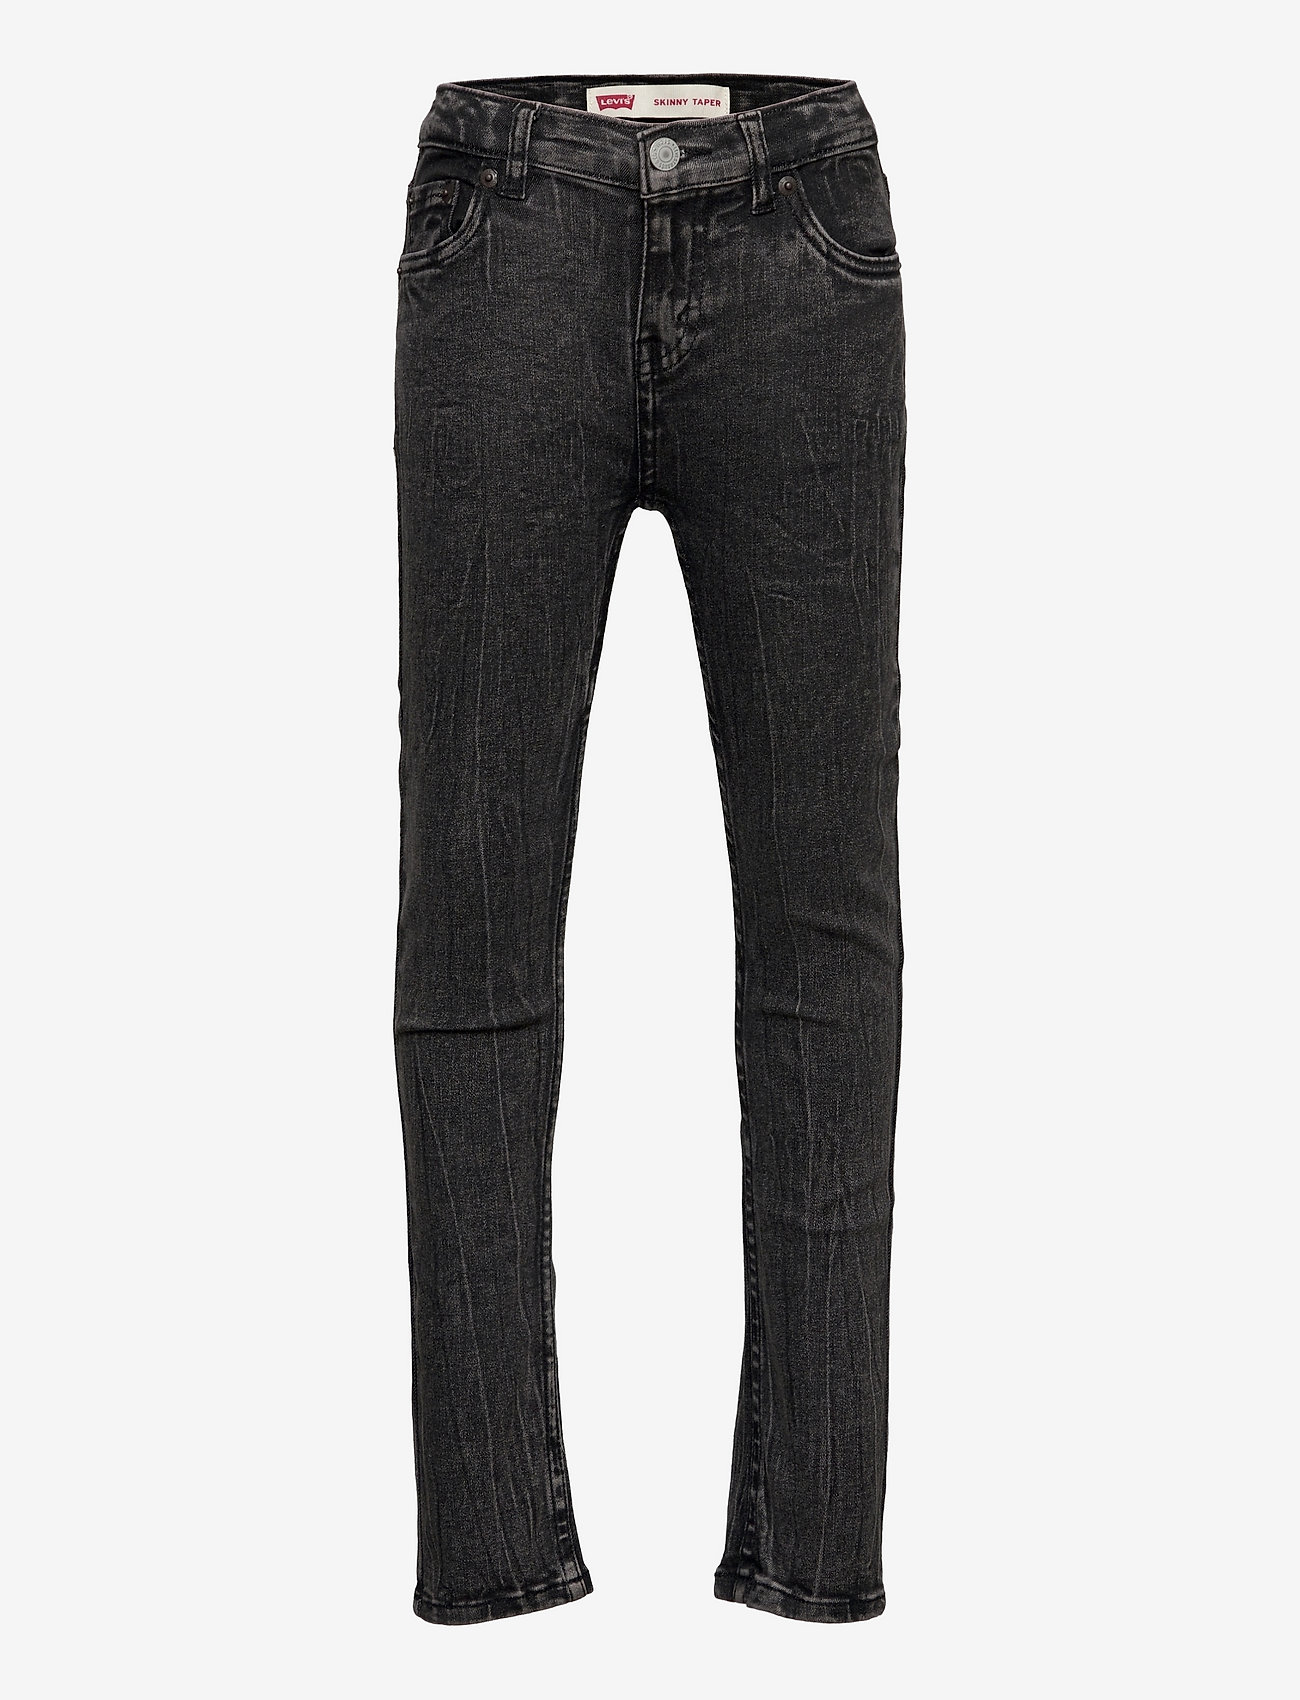 Levi's Lvb-skinny Taper Jeans (Fortress), ( €) | Large selection of  outlet-styles 